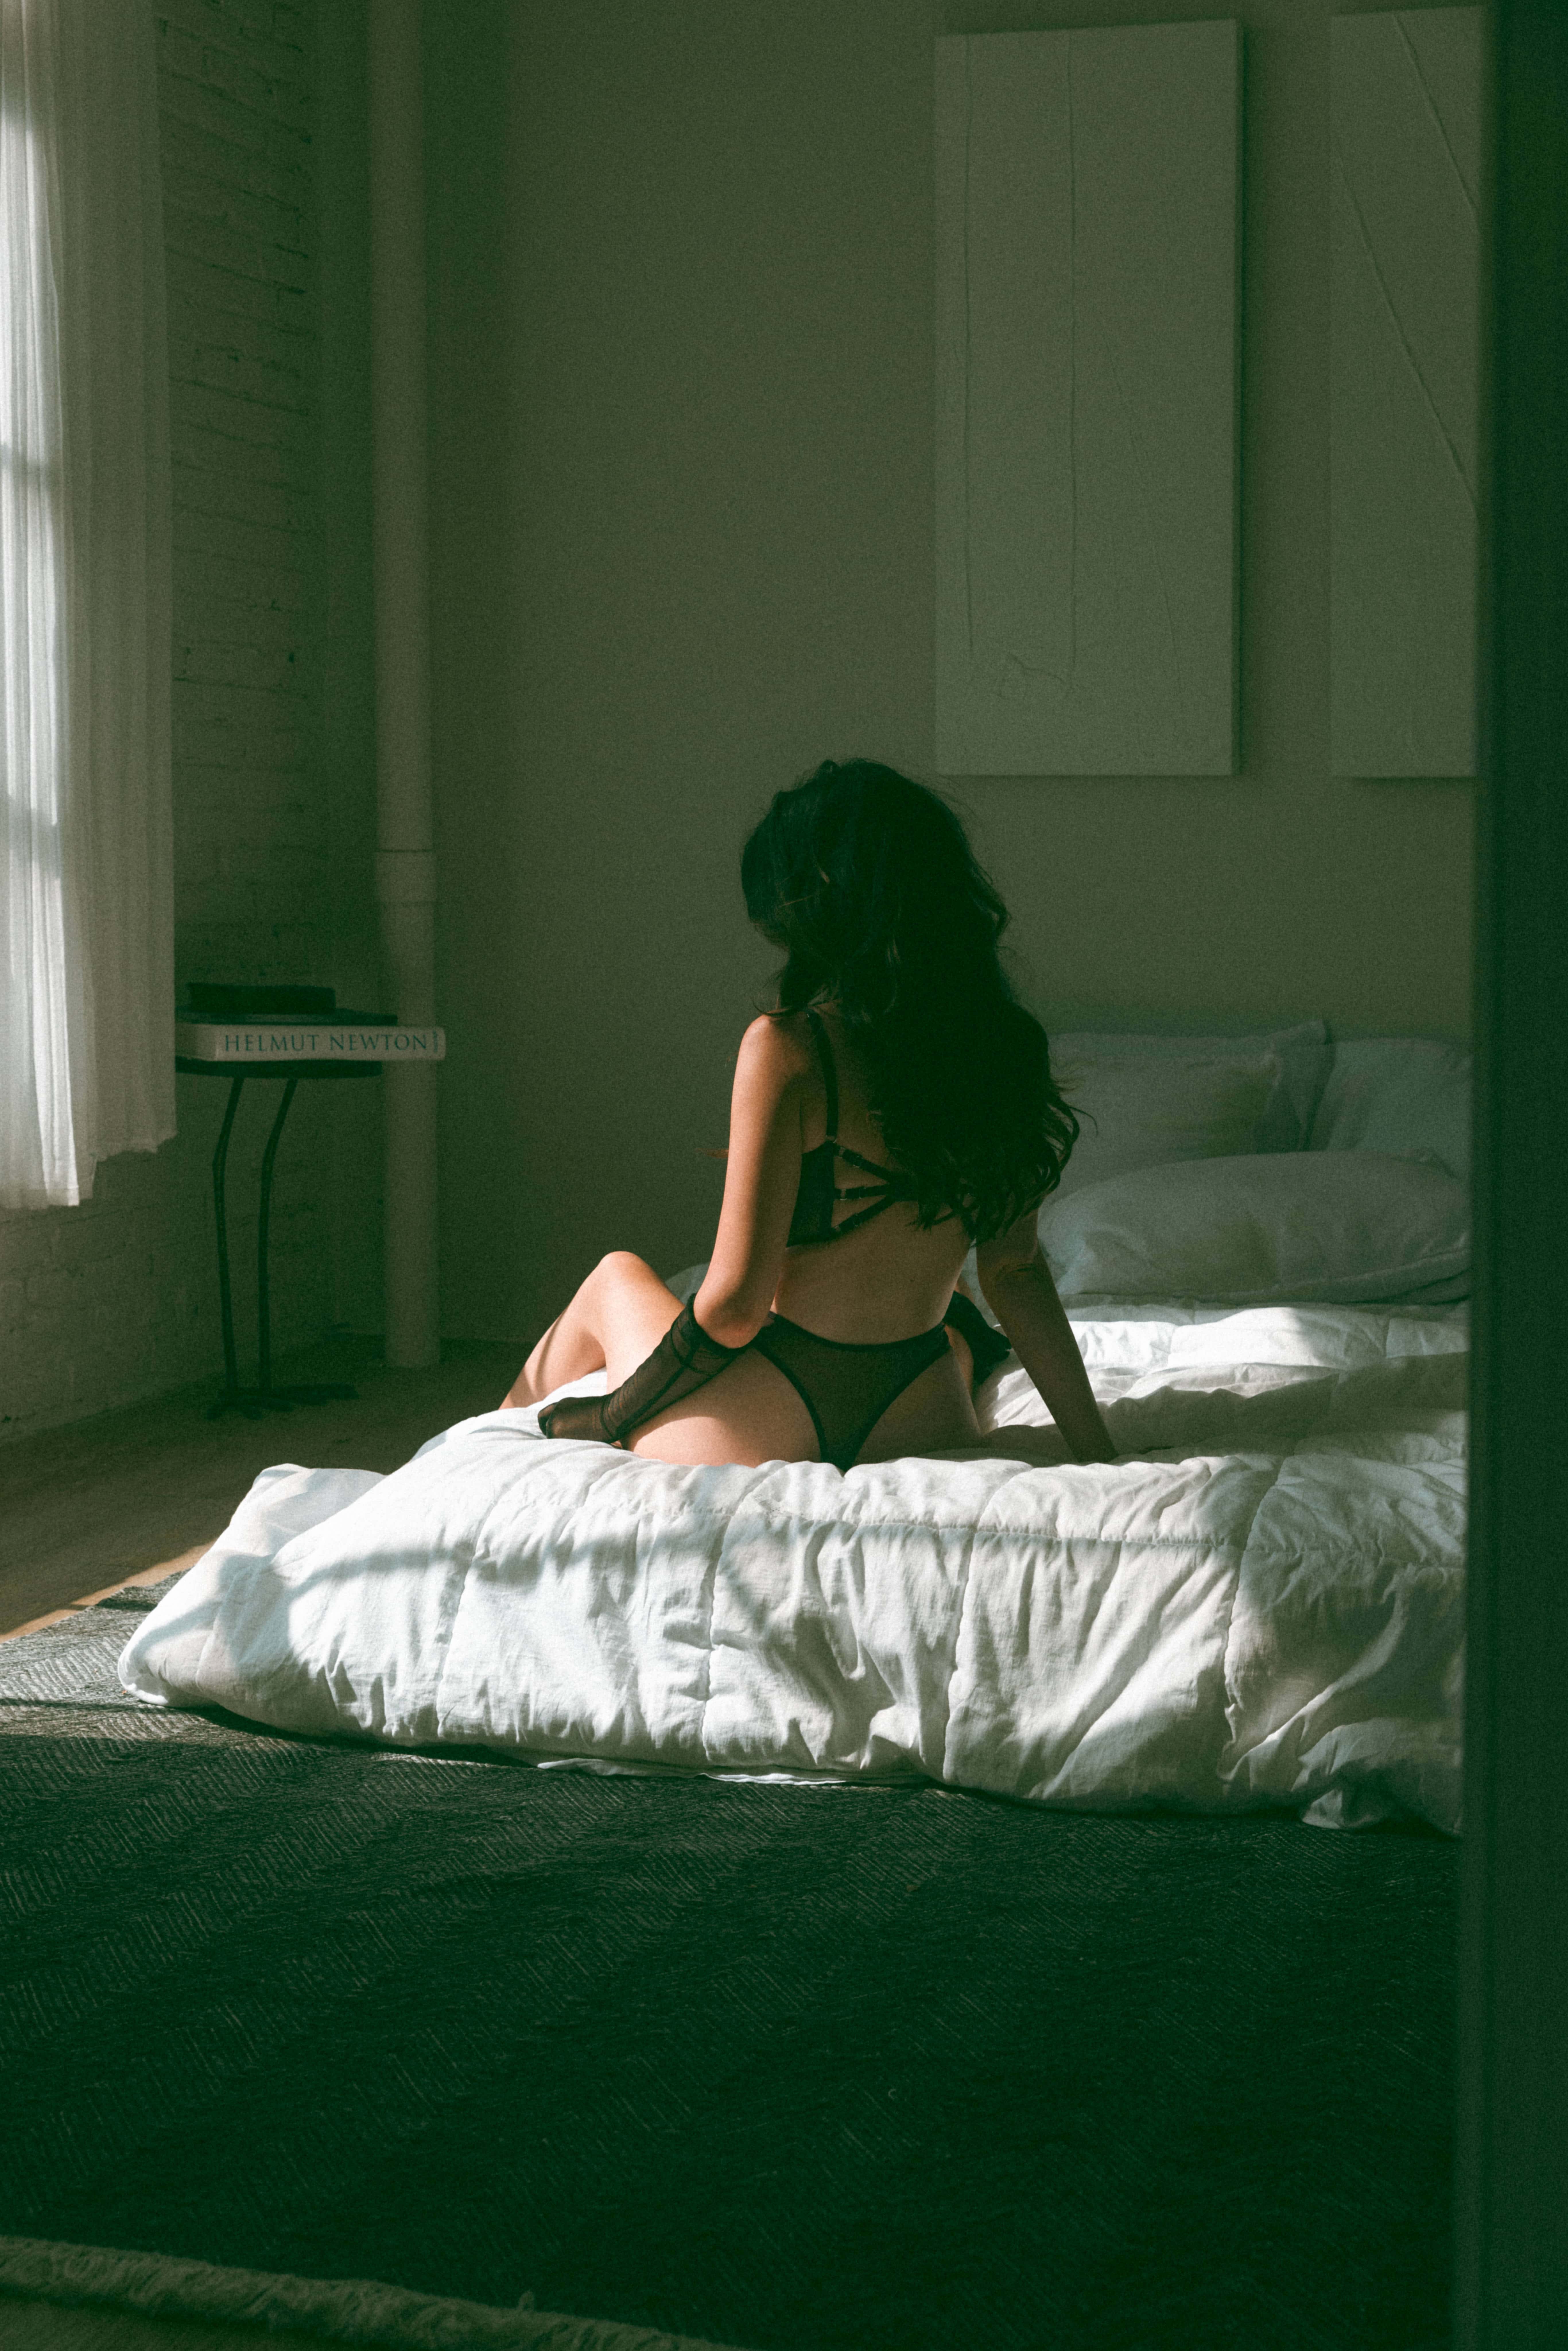 a woman sitting on a bed with her back to the camera, wearing intimates while the light from the windows shines on her